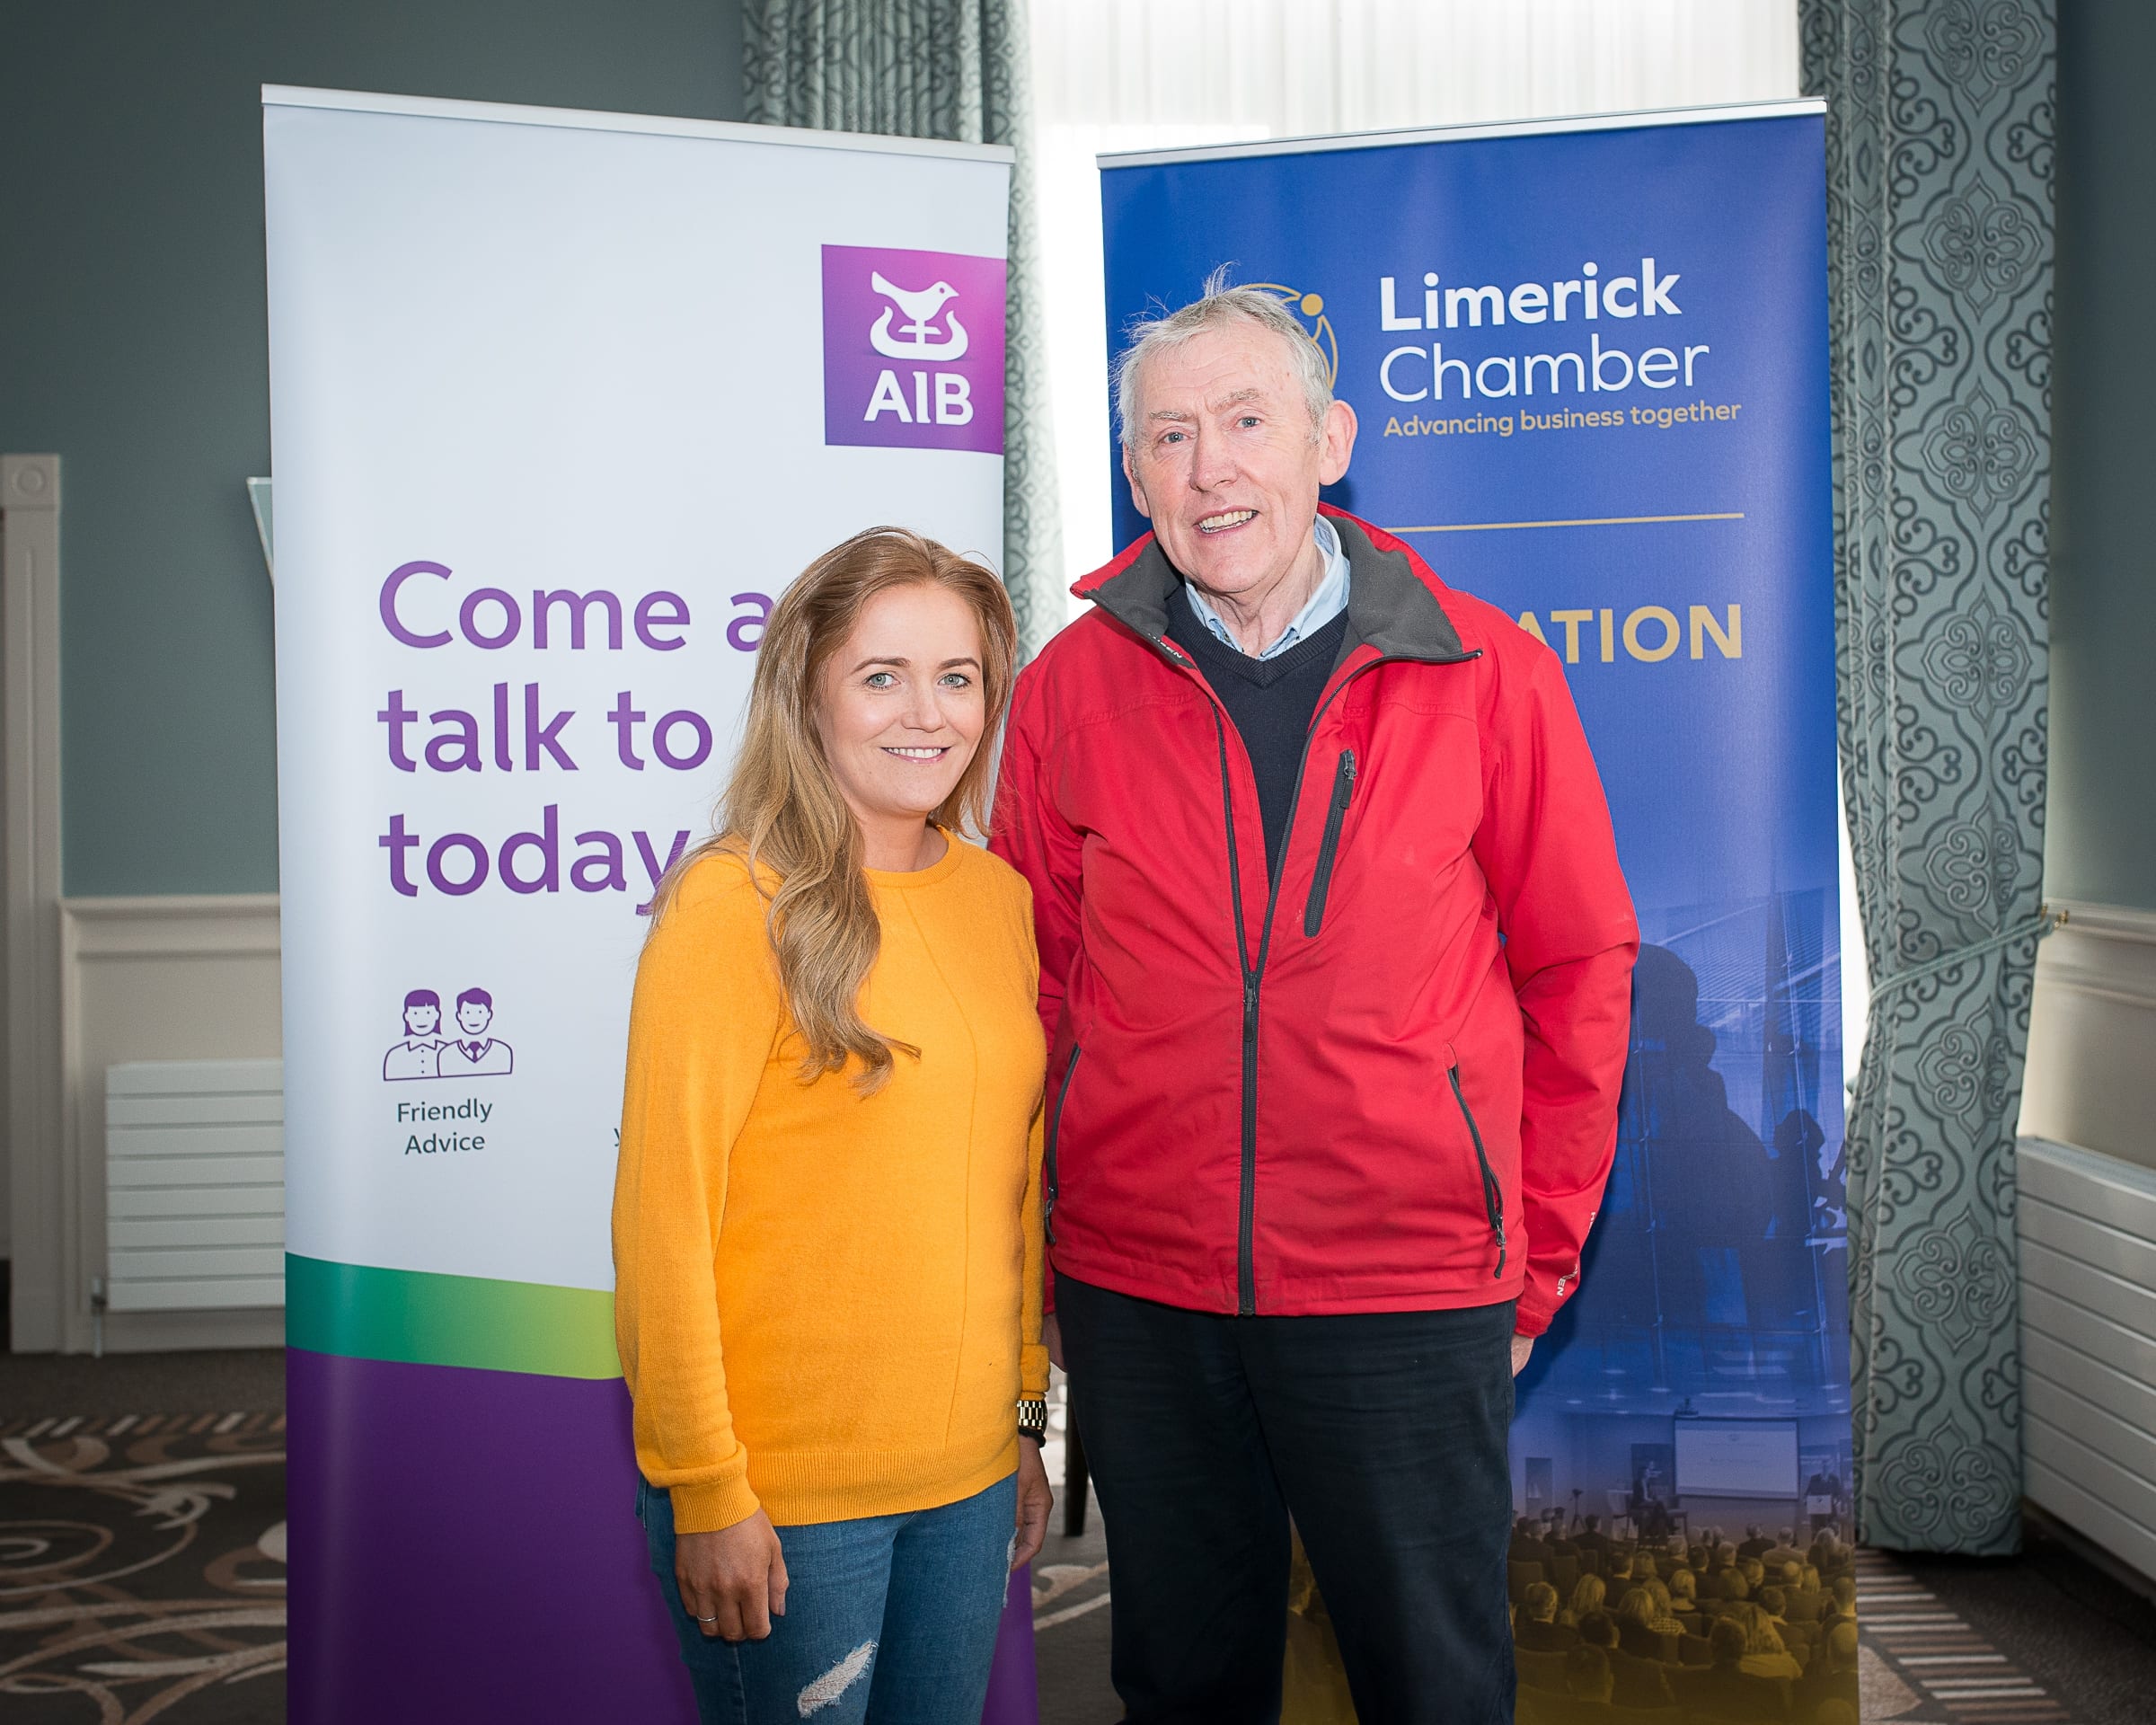 From left to right Agri Tourism Event Newcastlewest which took place on the 29th April in The Longcourt House Hotel: Fiona Sheedy - Athea Hoeey, Jim O’Brien - O’Brien Artisian Farmhouse  Chesse